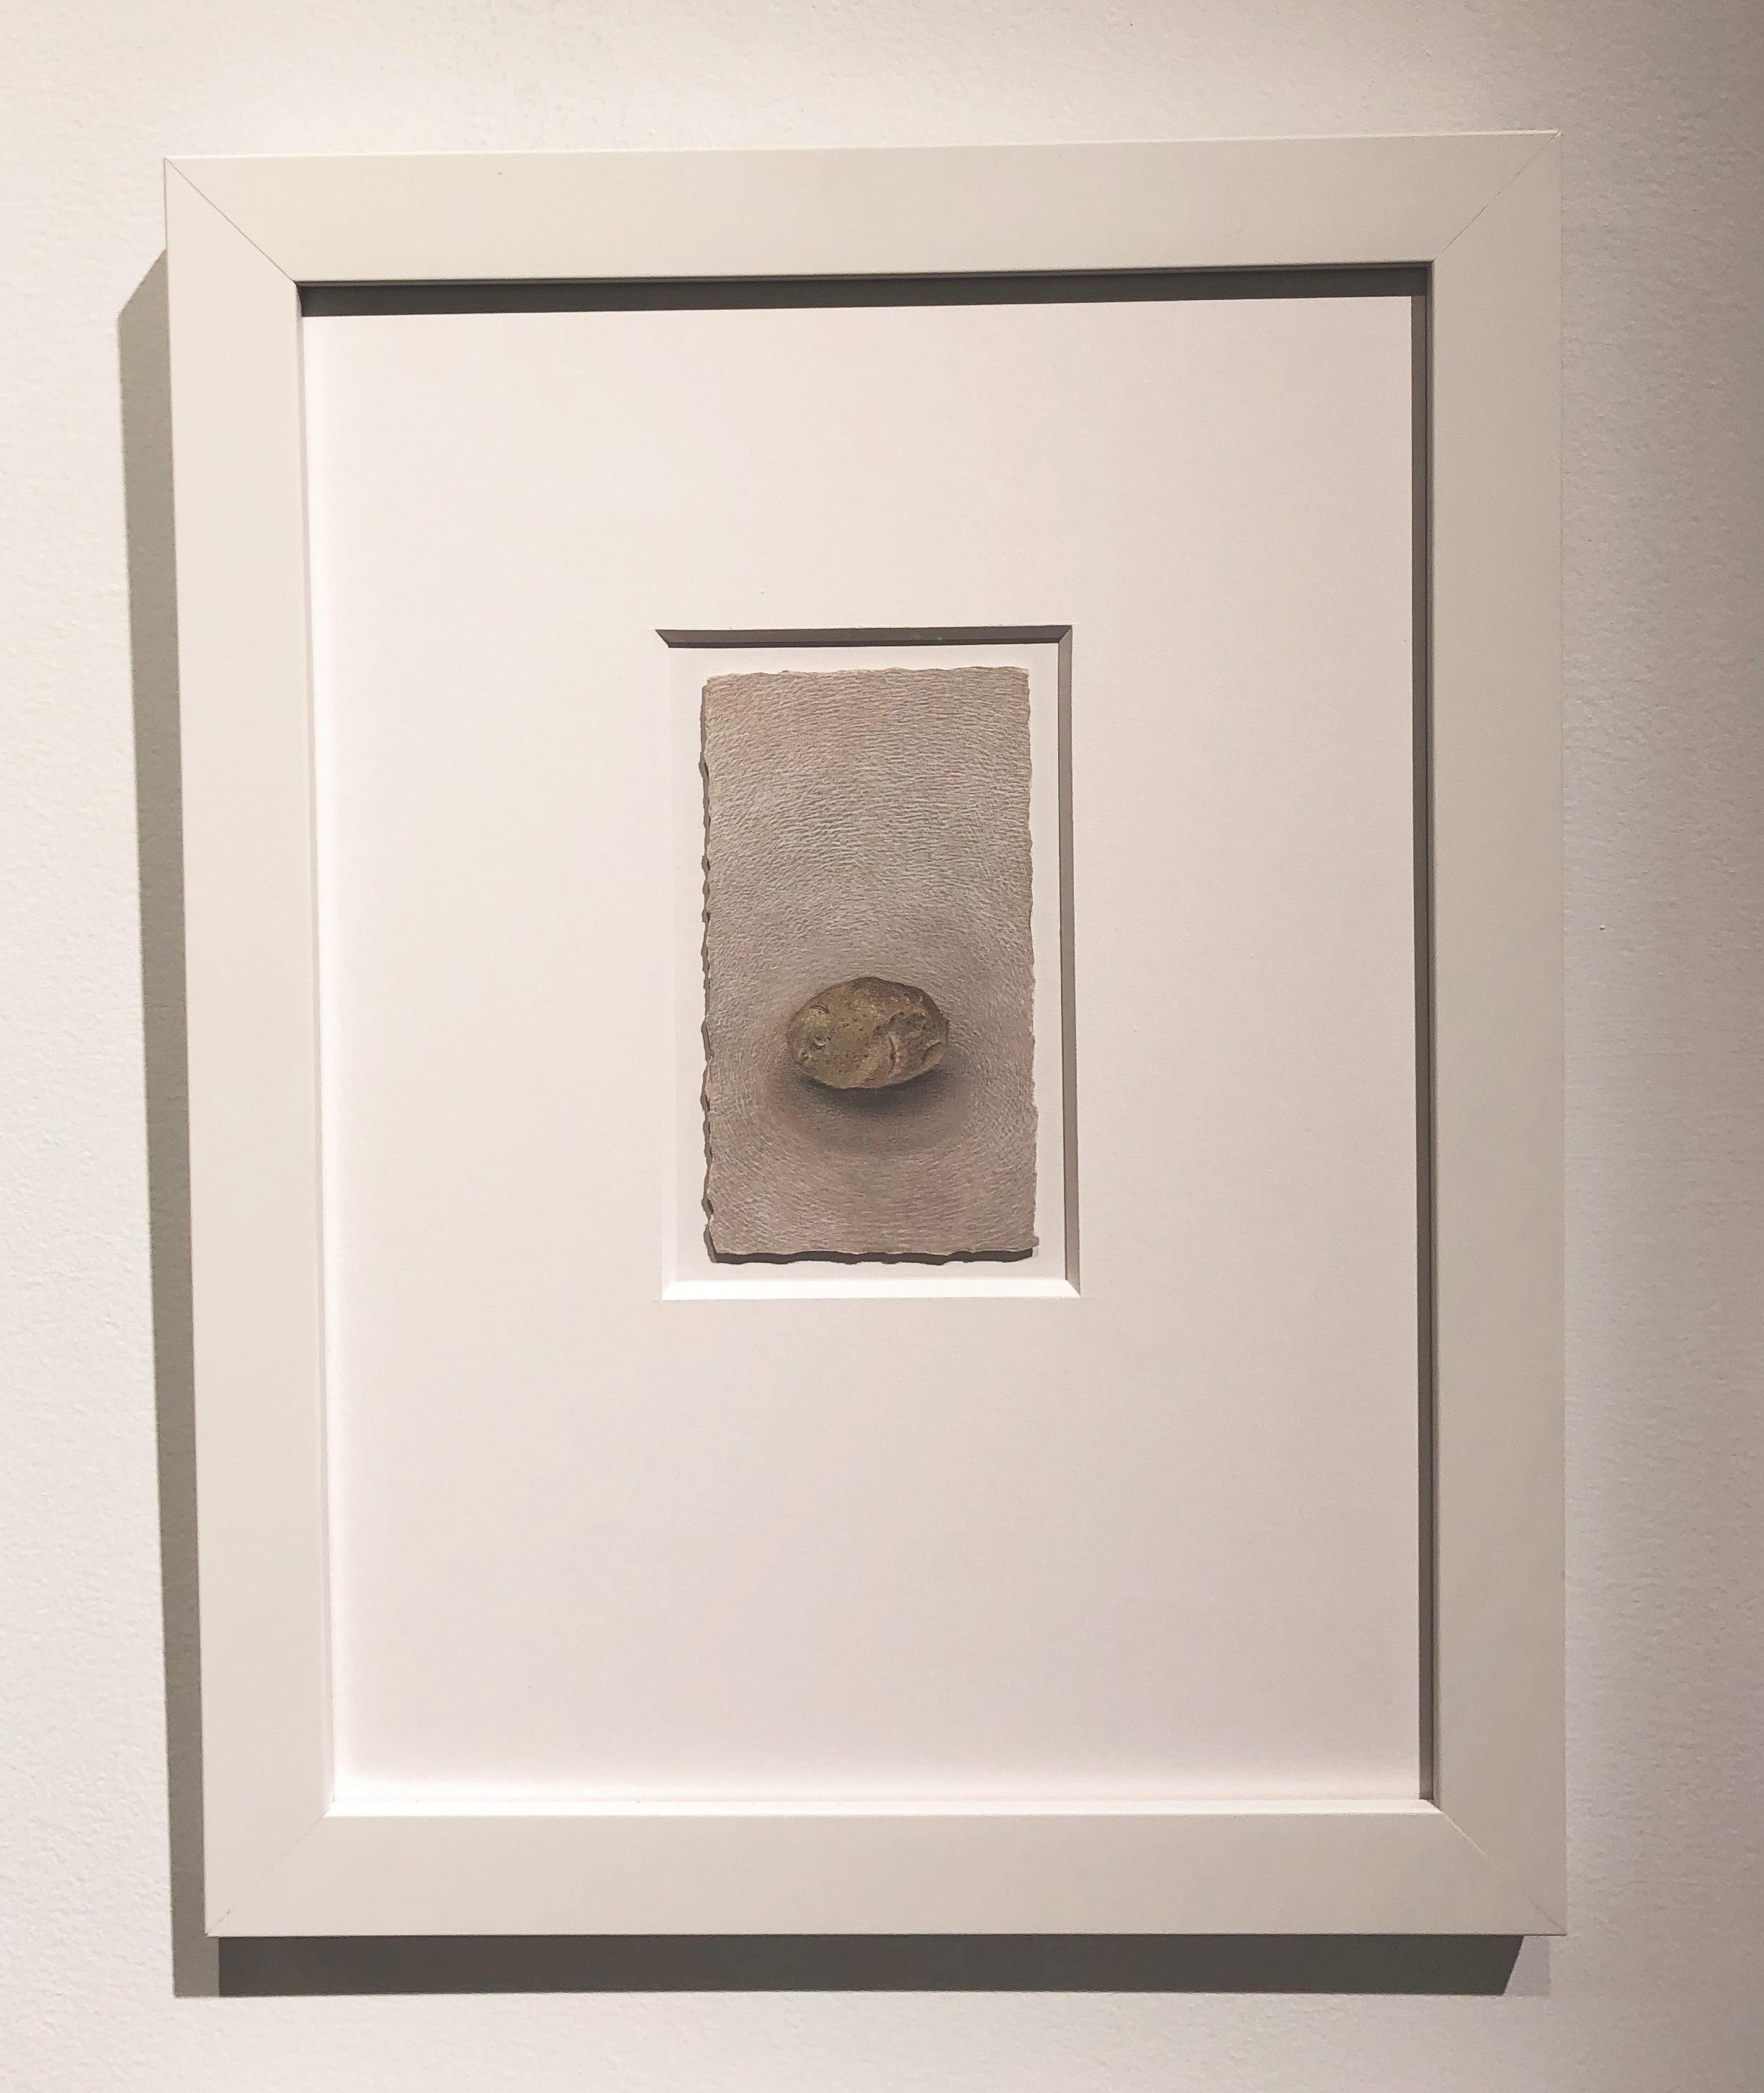 One Potato - Tiny Original Still Life Painting of a Potato on Deckled Edge Paper - Contemporary Art by Christina Haglid